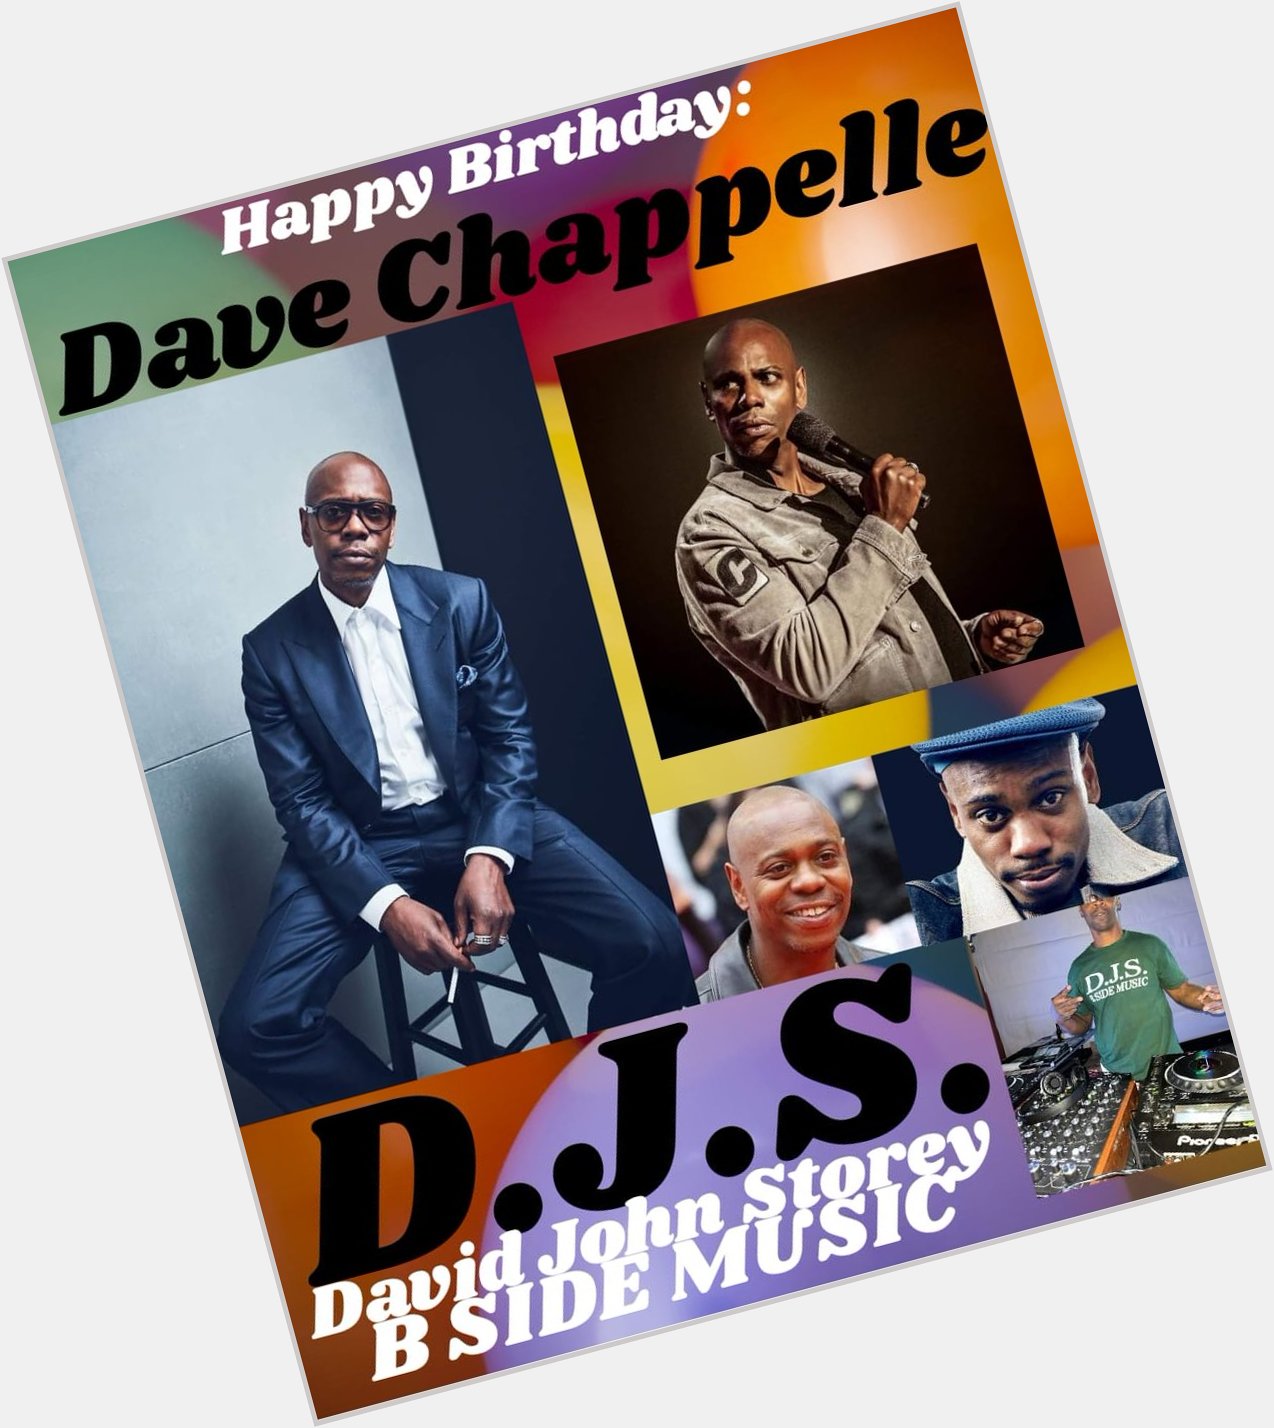 I(D.J.S.)\"B SIDE\" saying Happy Birthday to Comedian/Actor: \"DAVE CHAPPELLE\"!!! 